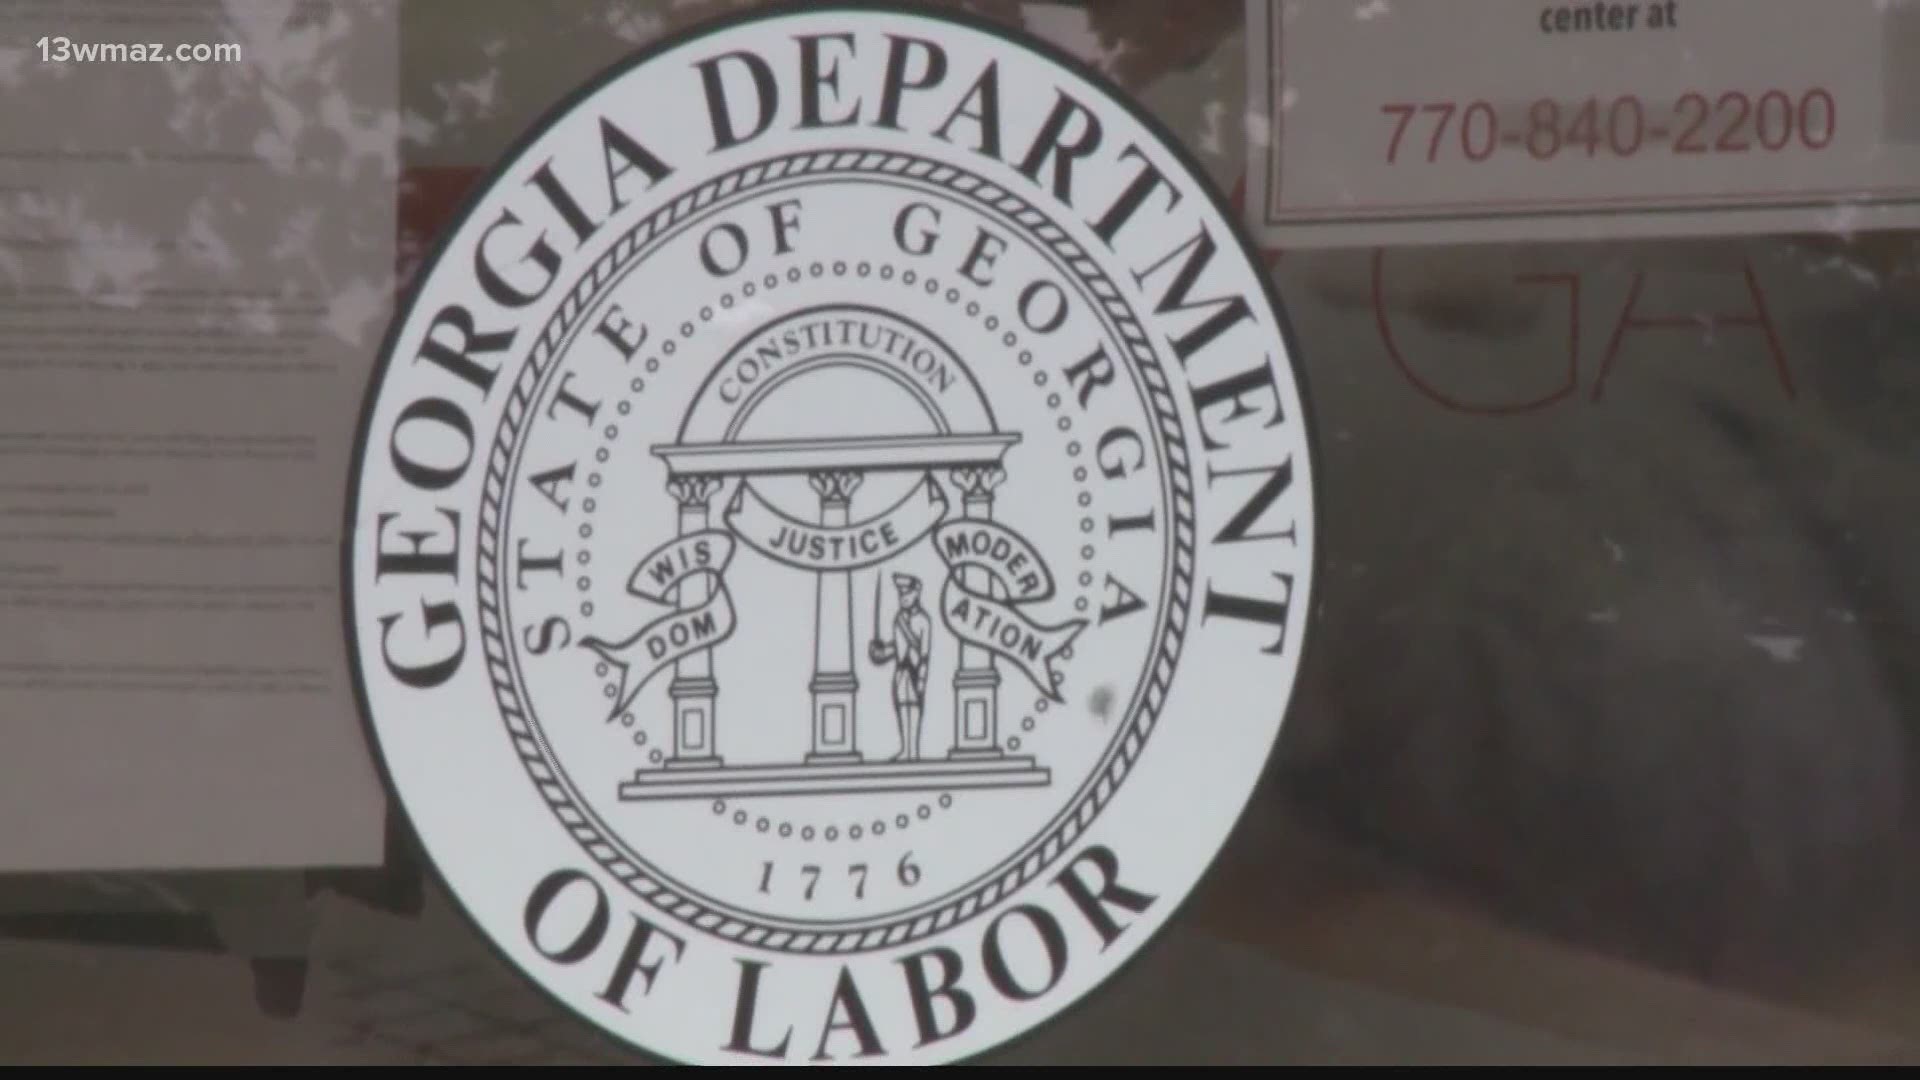 Many people have written in to 13WMAZ over the past few months detailing problems they've encountered with GDOL. One state rep says he sees the frustration.